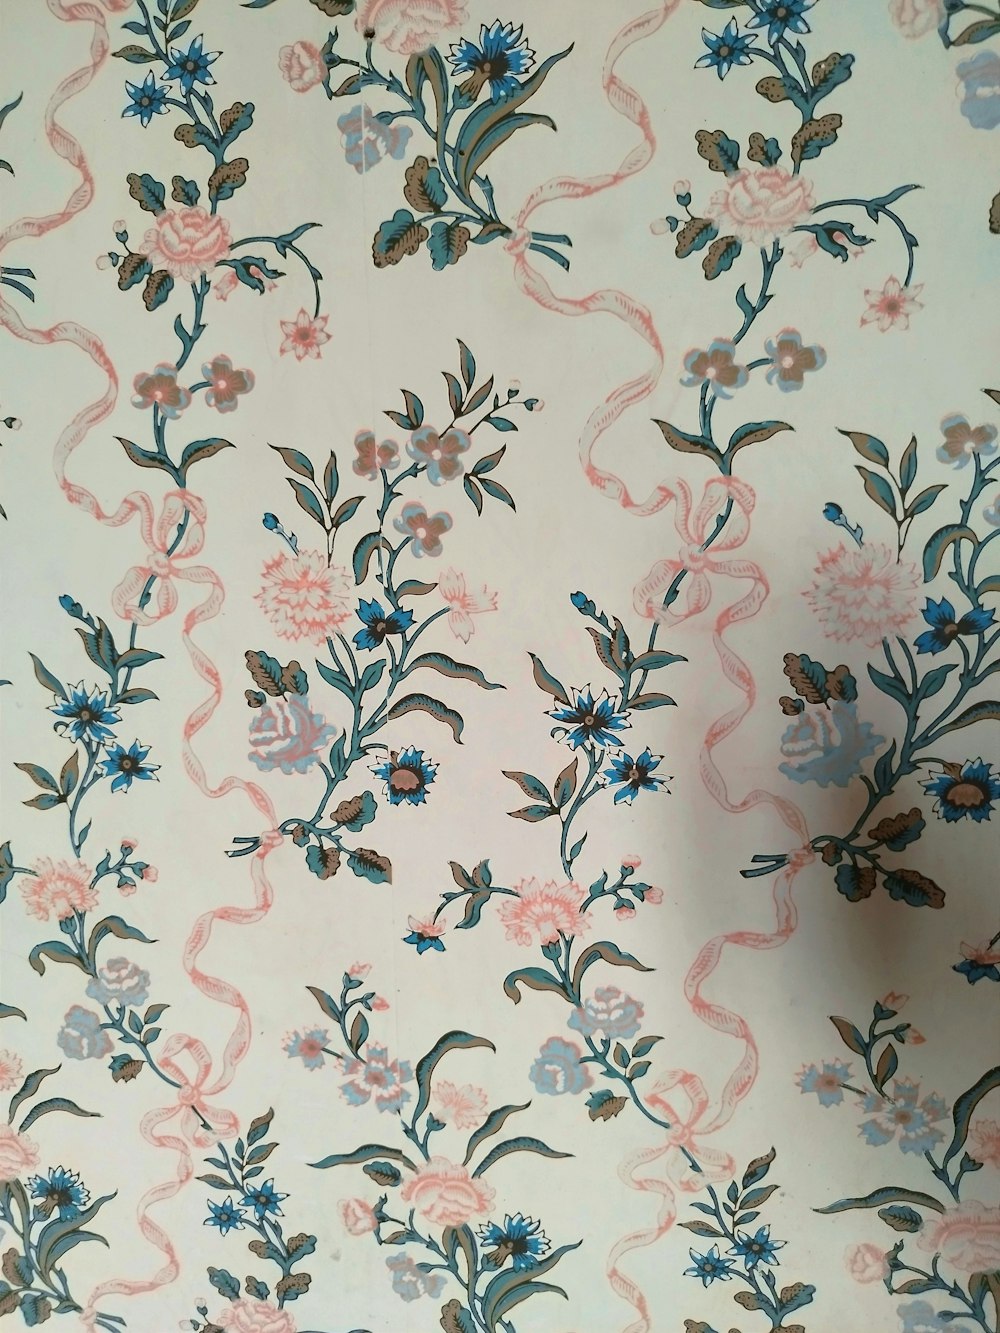 a floral wallpaper with blue and pink flowers